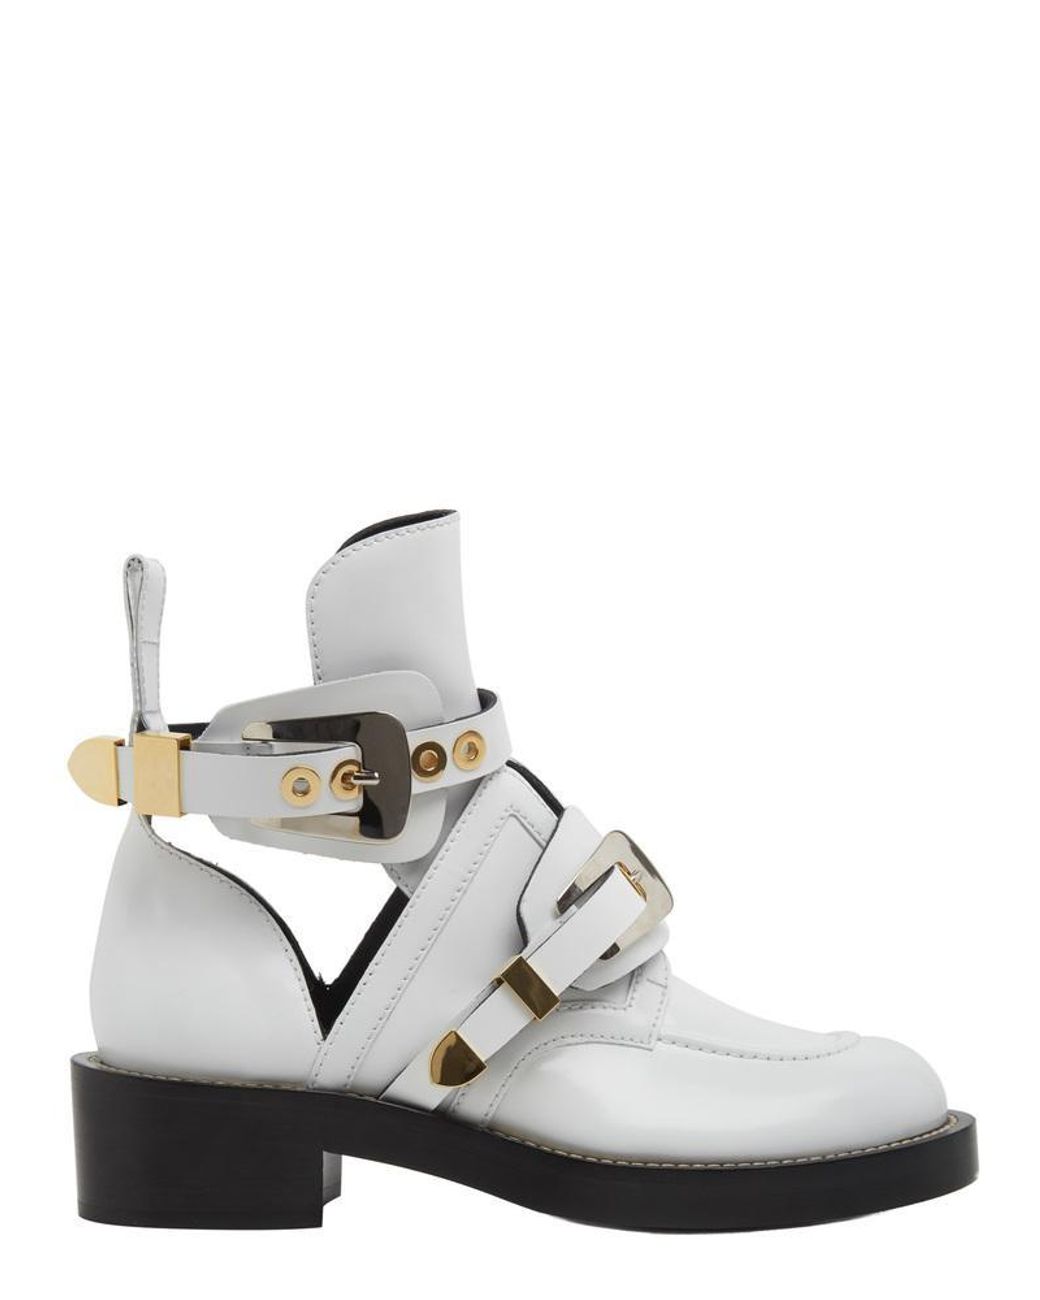 Balenciaga Leather Cutout Buckle Boot in White | Lyst